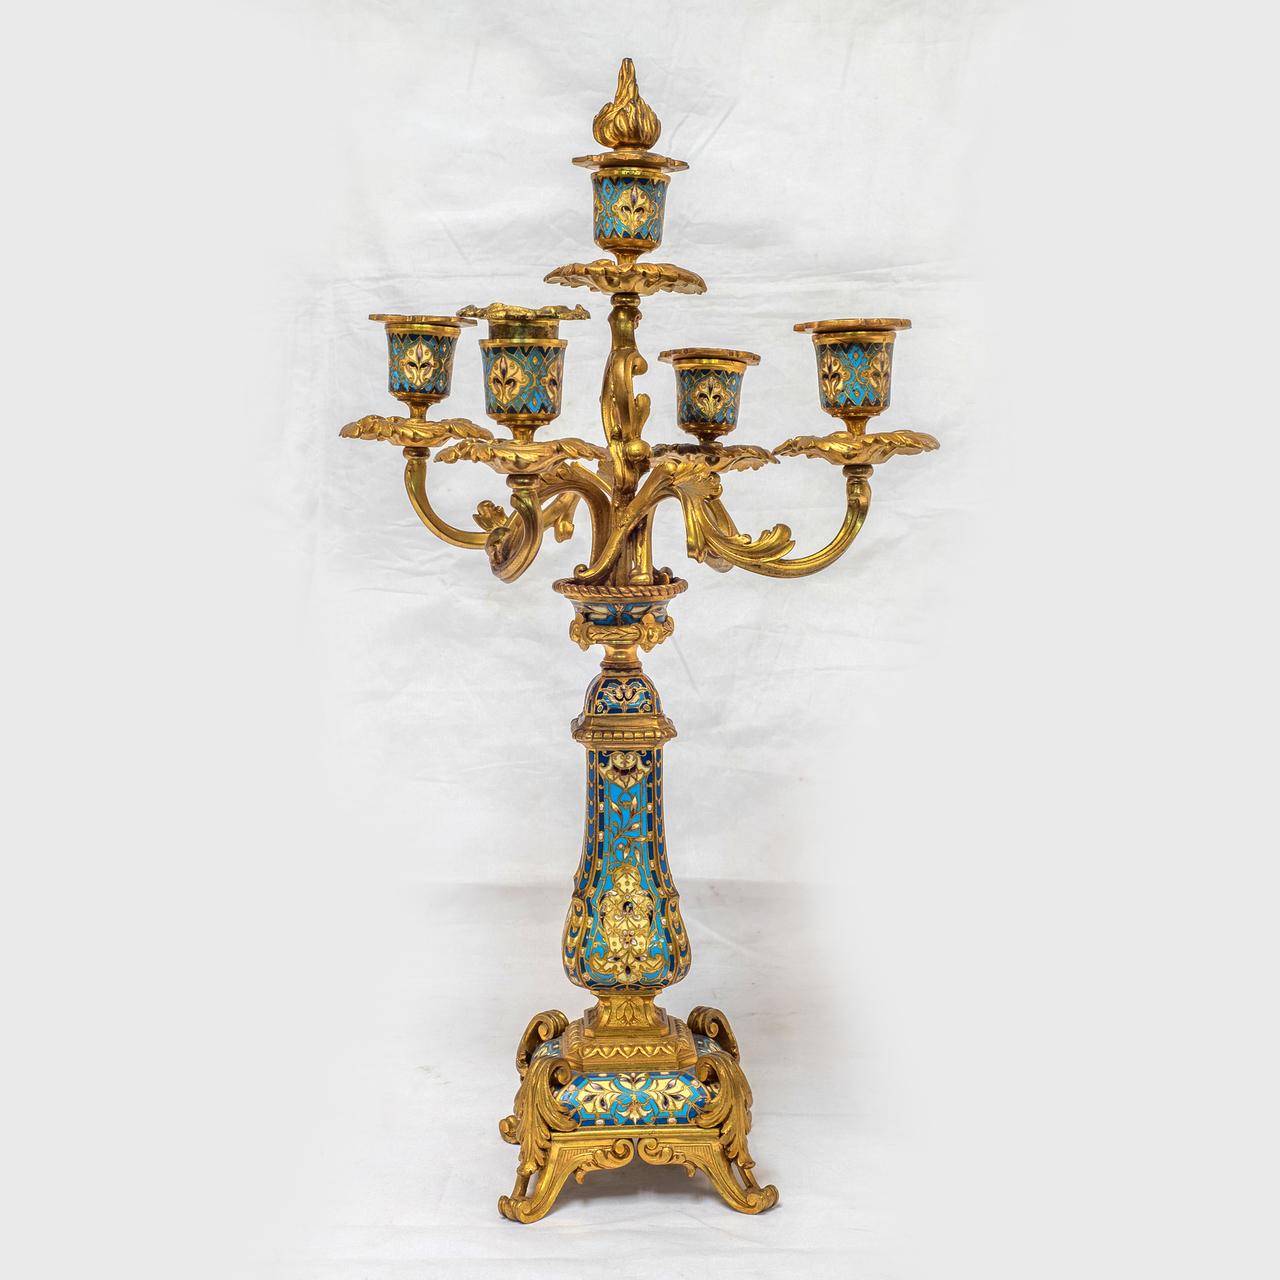 19th Century French Champleve Enamel and Ormolu Clock Set For Sale 4